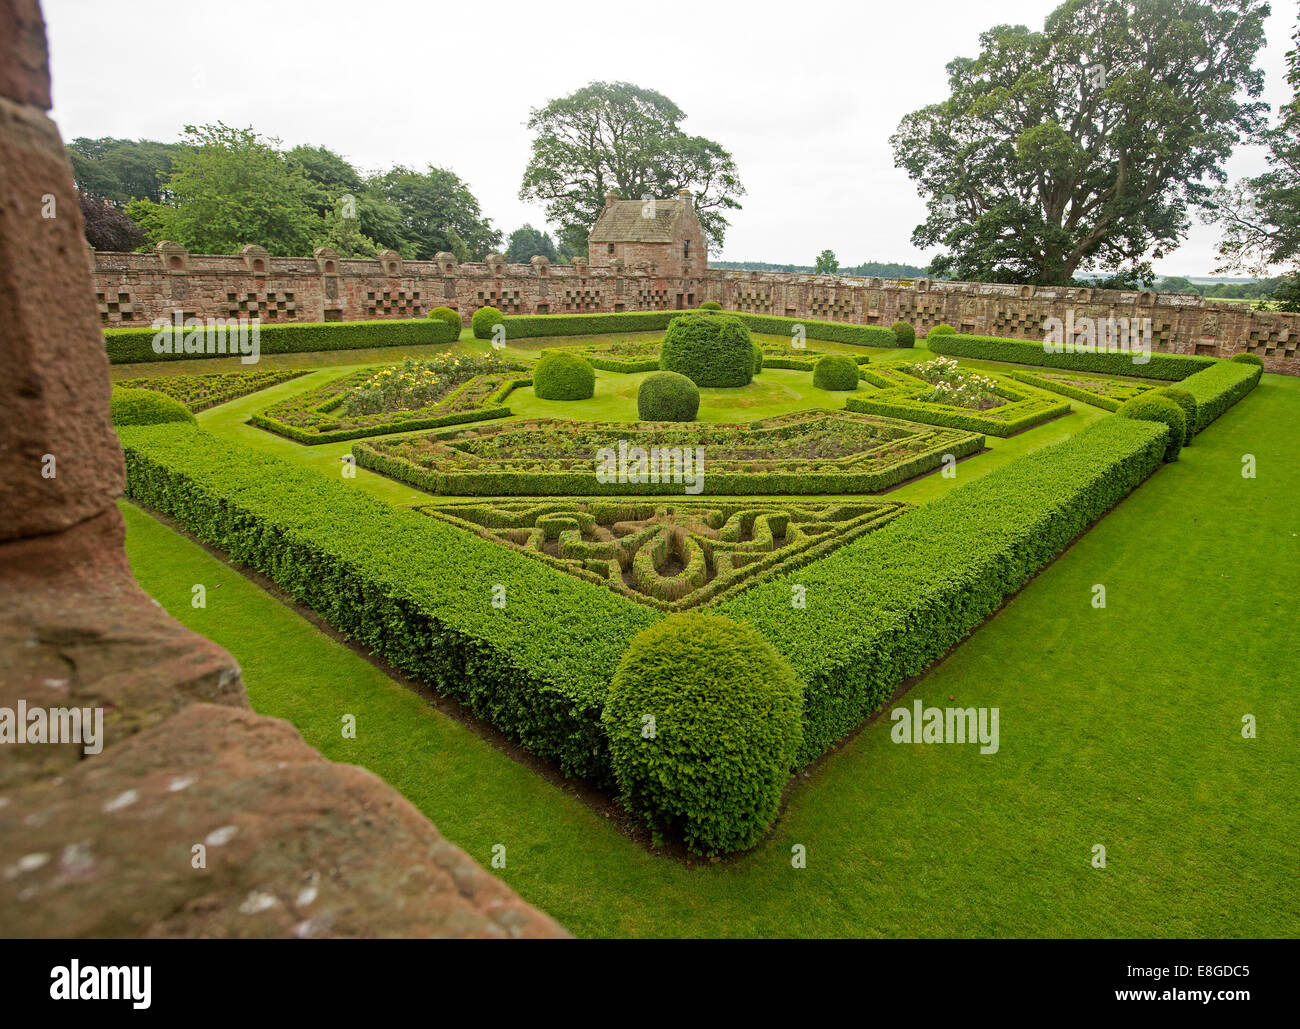 Formal 17th century walled gardens with low hedges, topiary, roses, lawns under blue sky at historic Edzell castle, Scotland Stock Photo